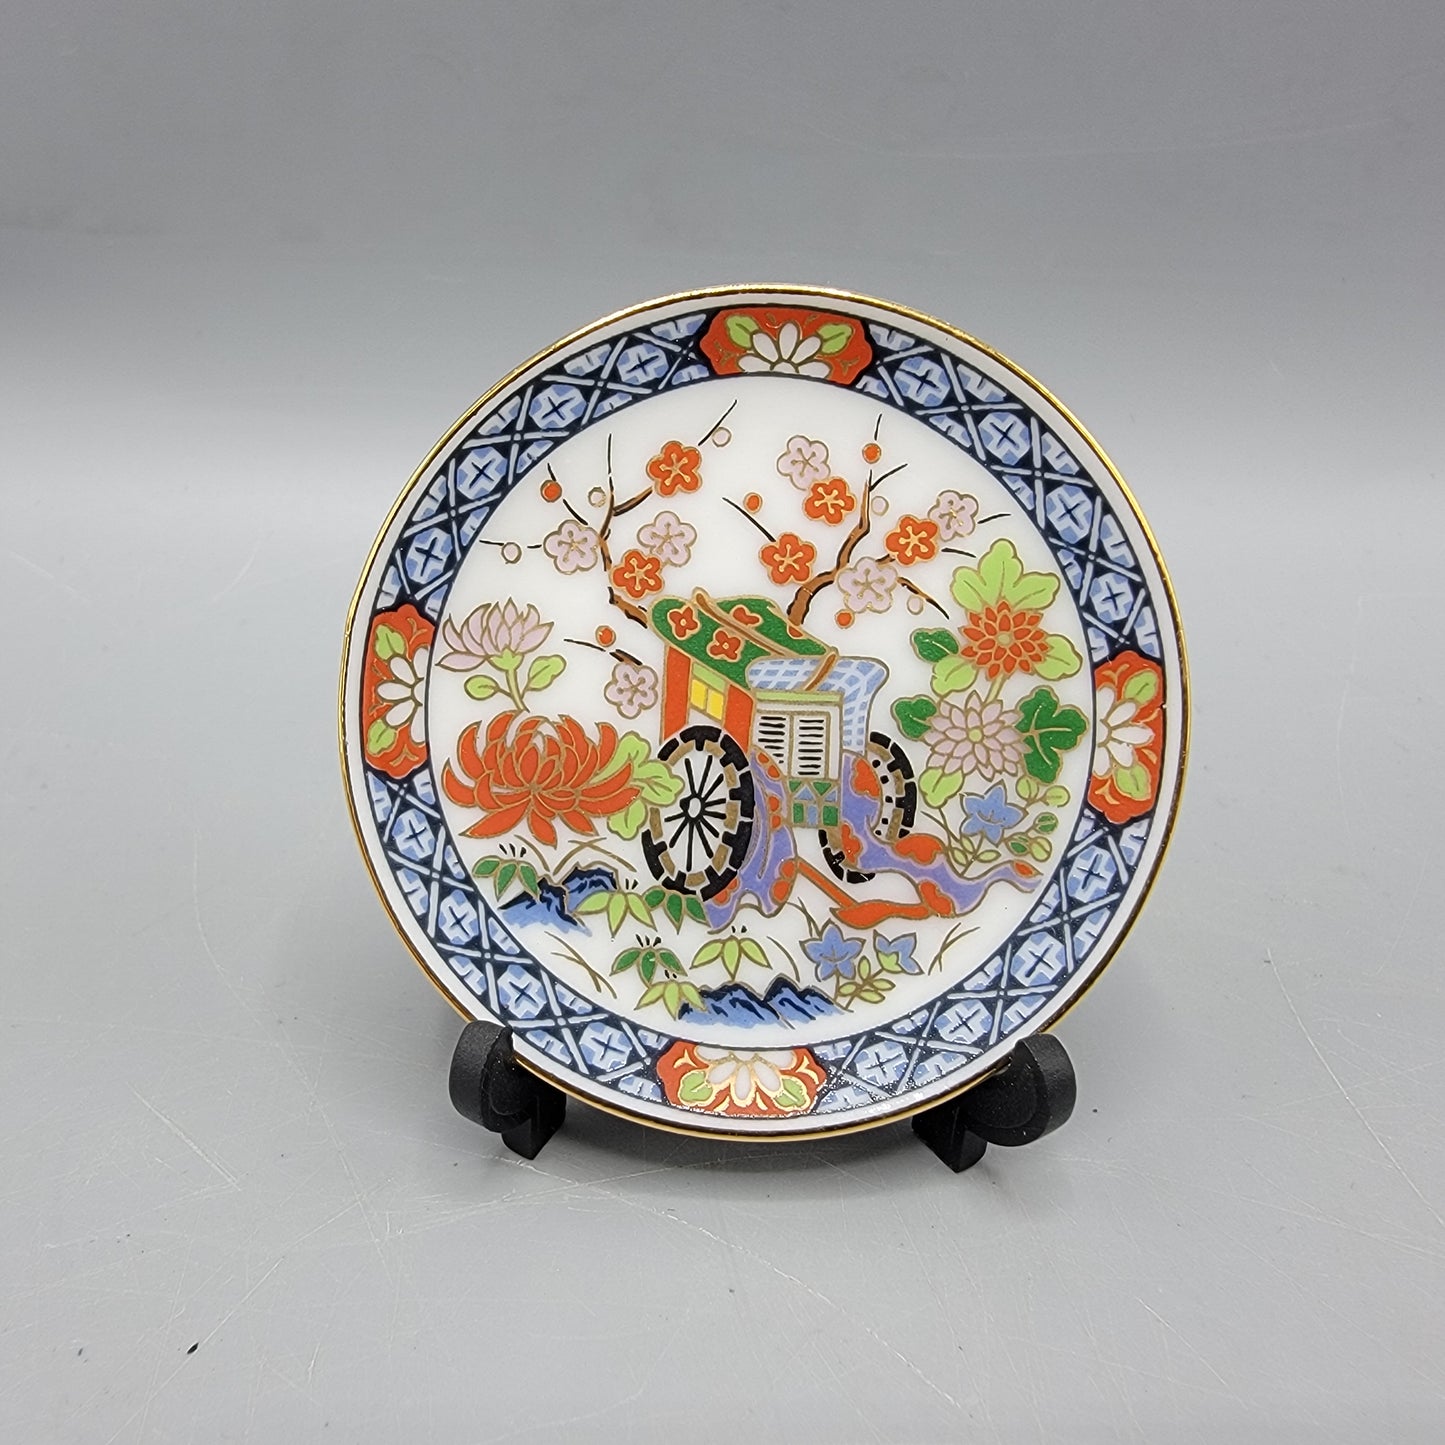 Miniature Chinese Porcelain Plate